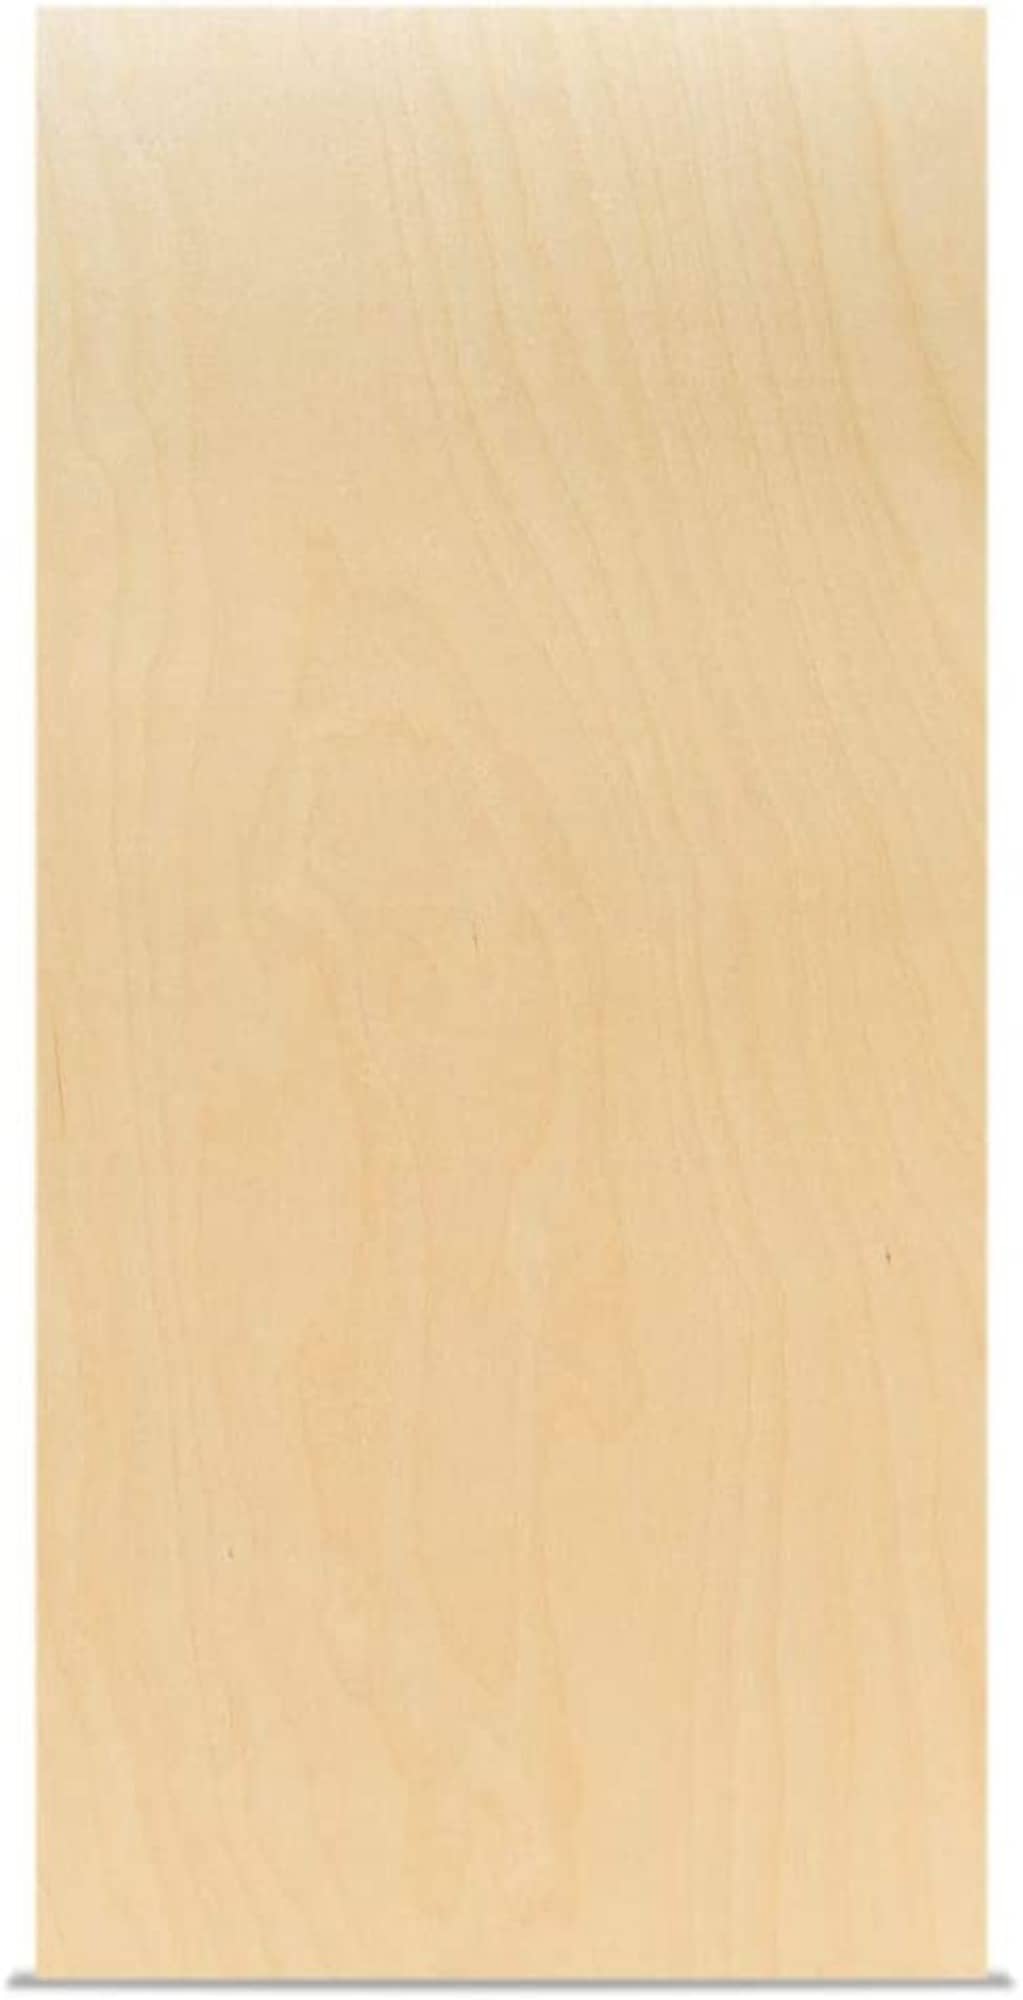 Woodpeckers Crafts Baltic Birch Plywood, 3 mm 1/8 x 8 in. Craft Wood, Box of 8 B/bb in Brown | MF-PLY-8-8-18-P8